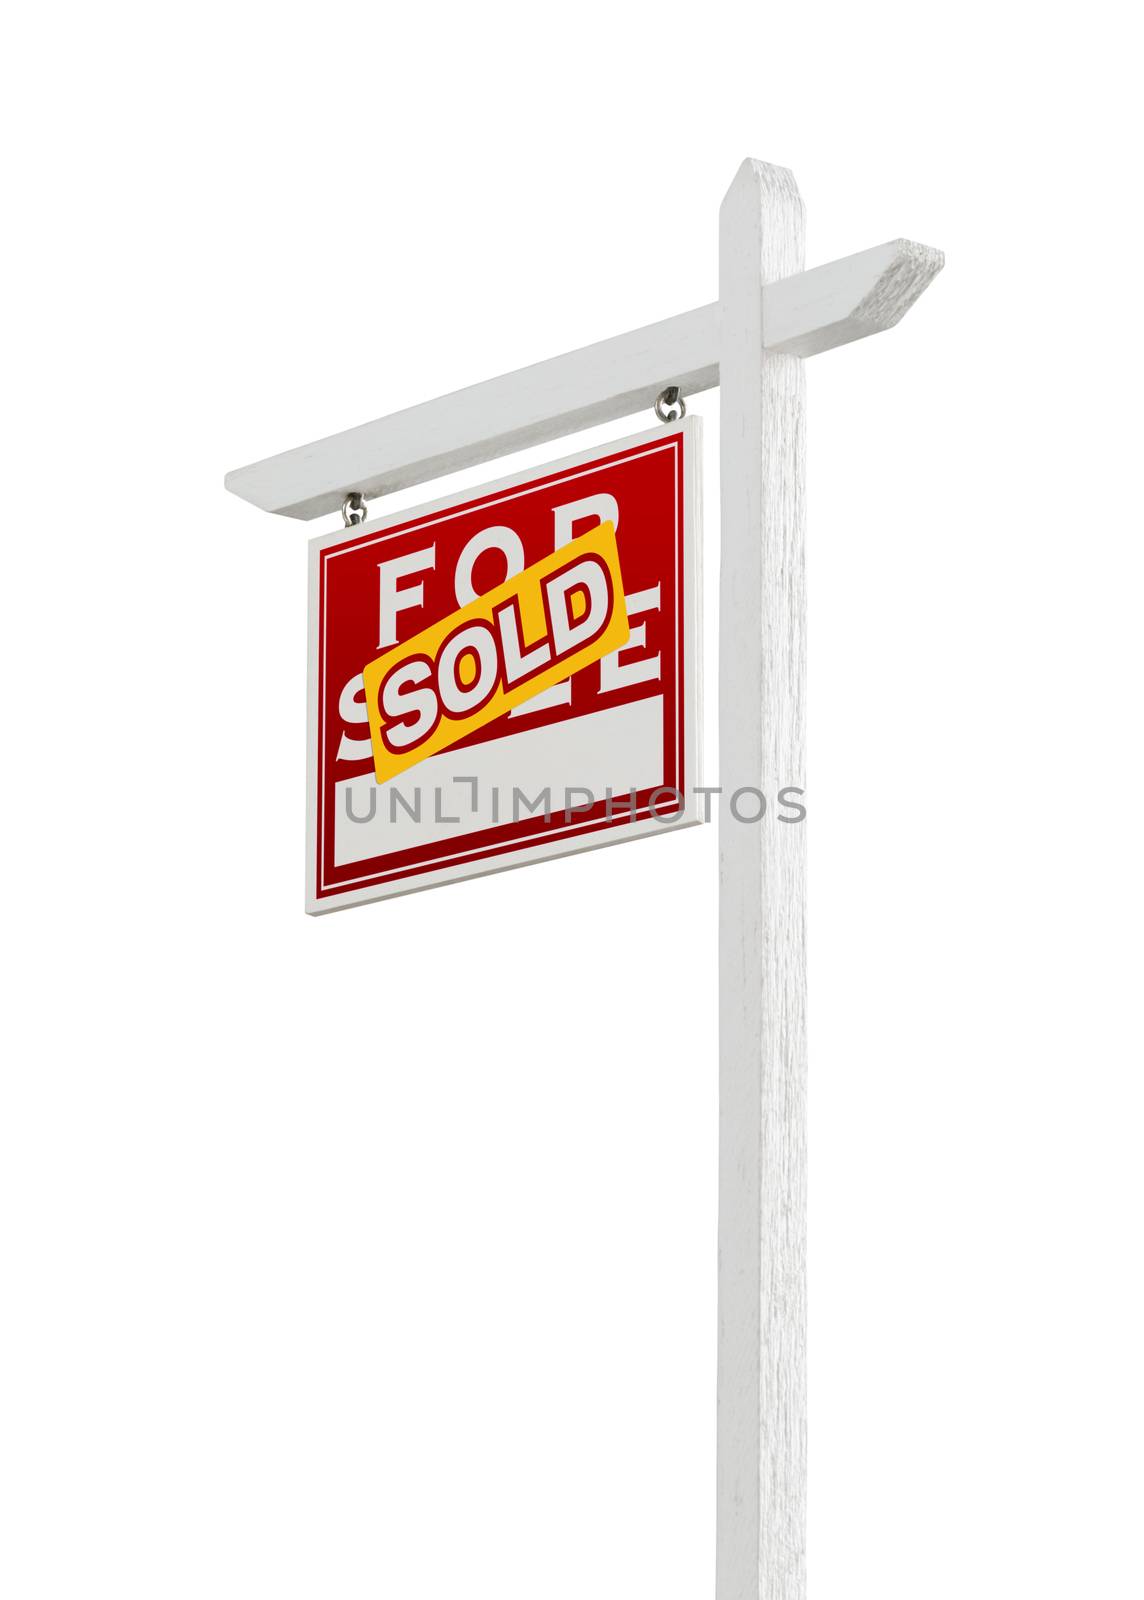 Left Facing Sold For Sale Real Estate Sign Isolated on a White Background.